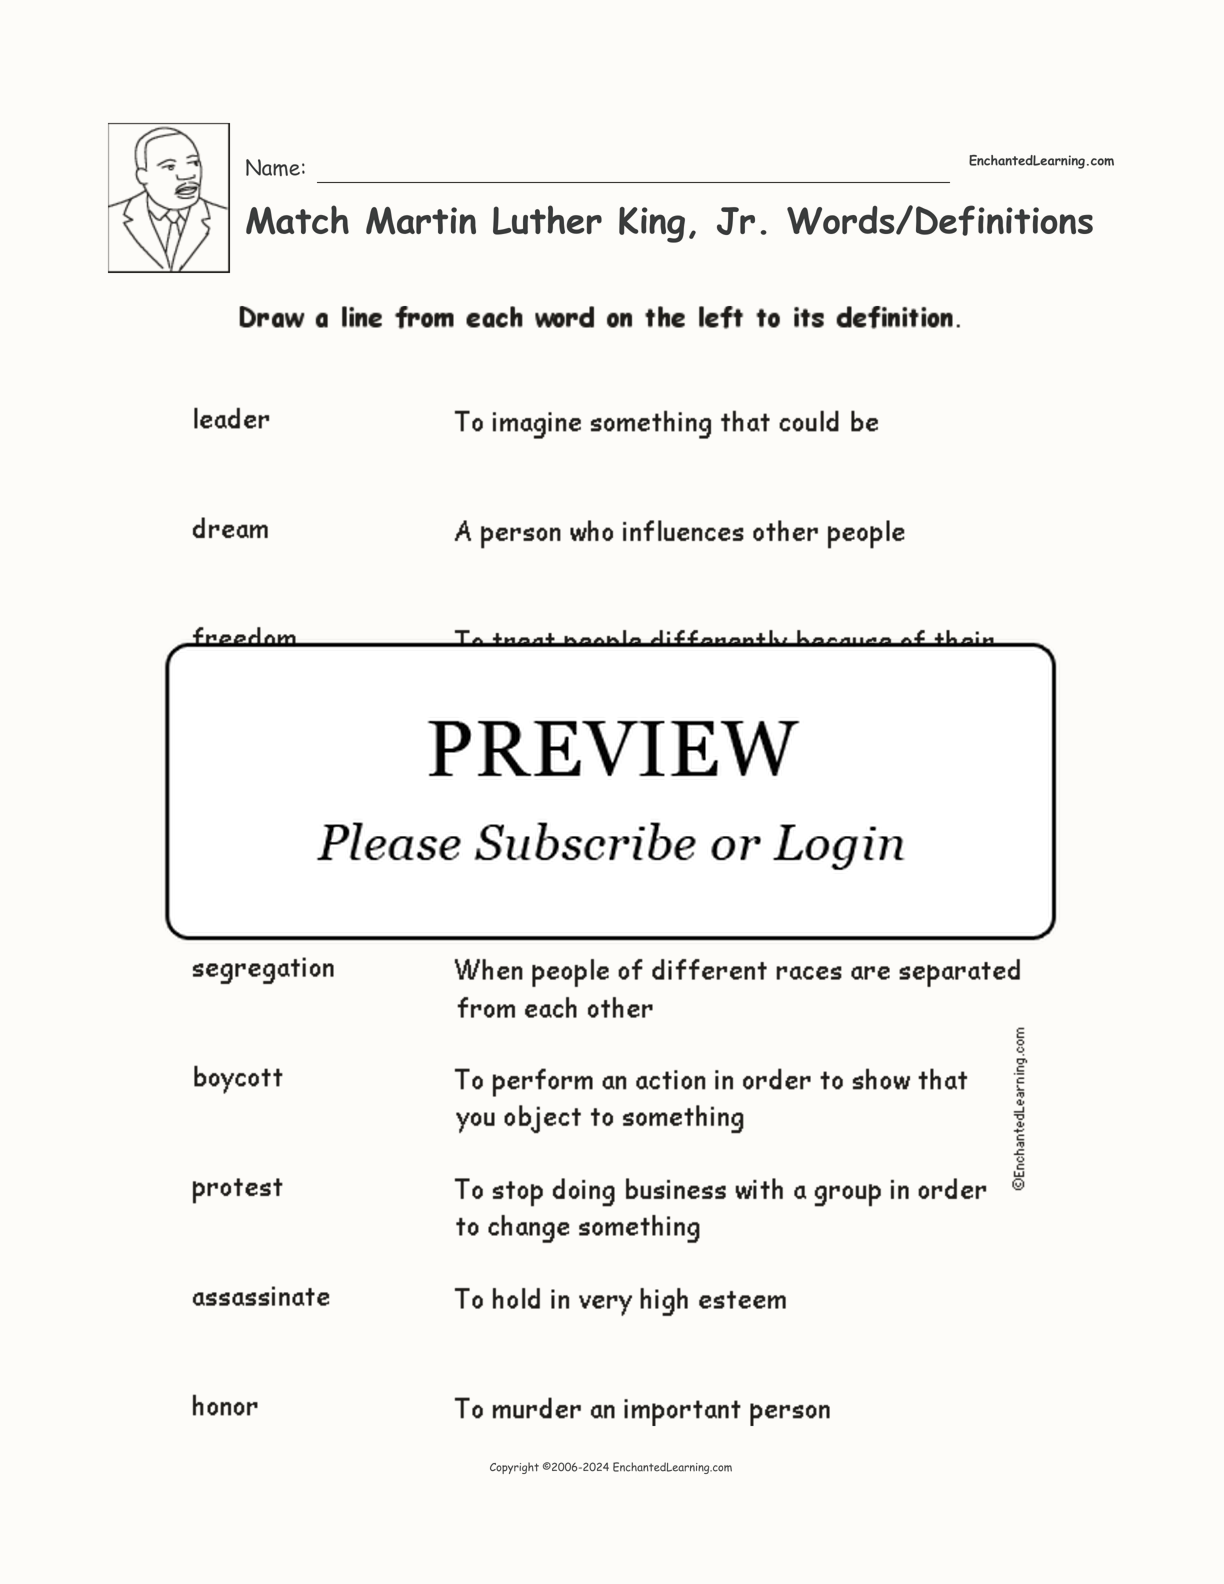 Match Martin Luther King, Jr. Words/Definitions interactive worksheet page 1